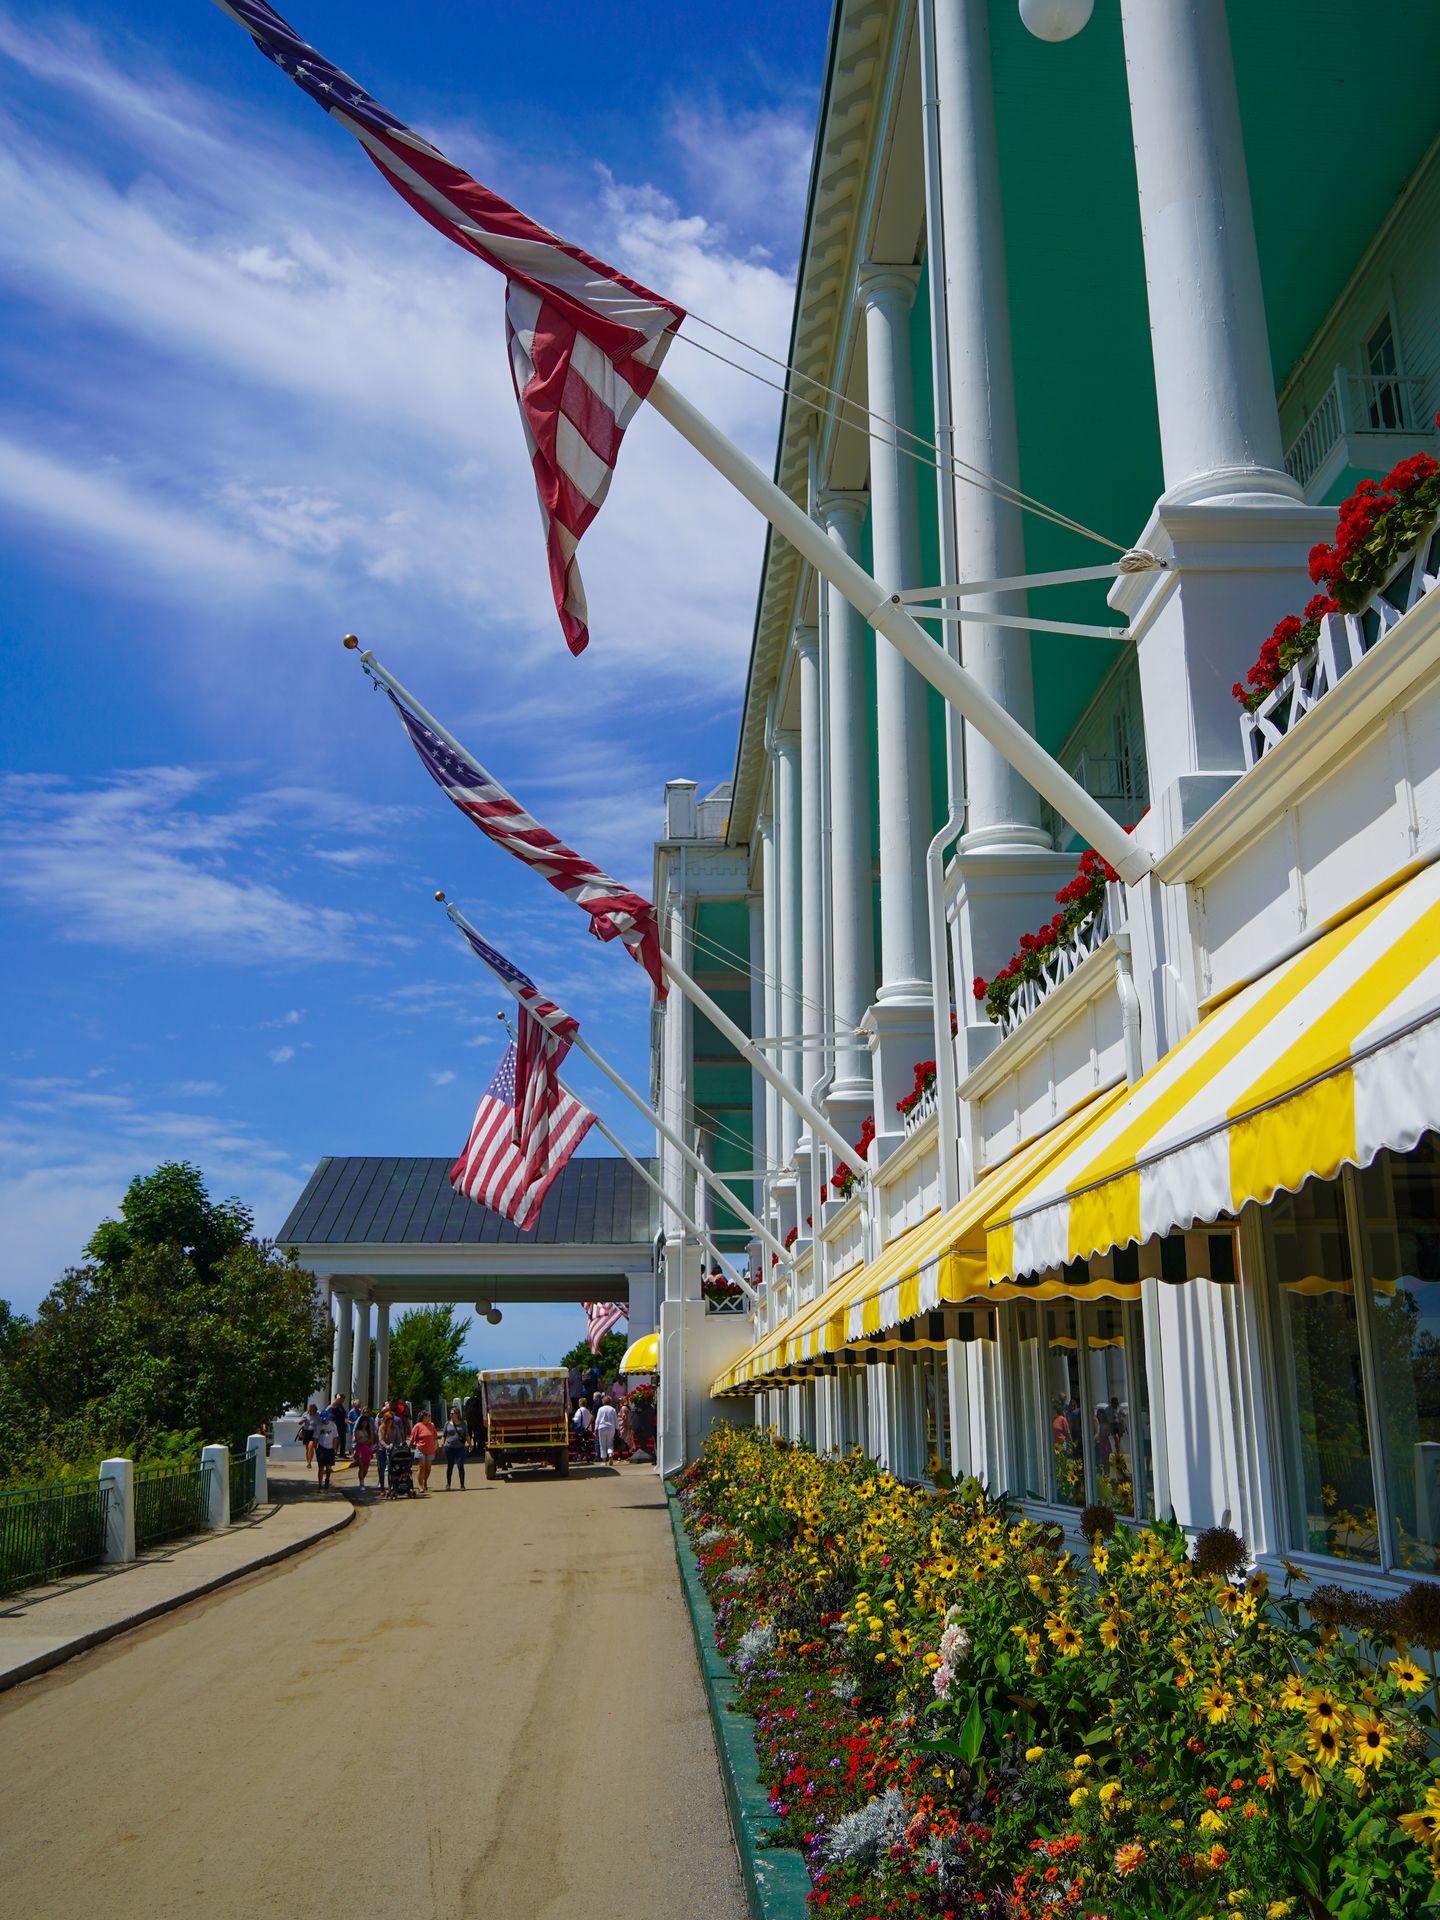 A view of the front of the Grand Hotel. There are white columns, an aqua-colored ceiling of the porch, awnings with yellow and white stripes and flower beds.